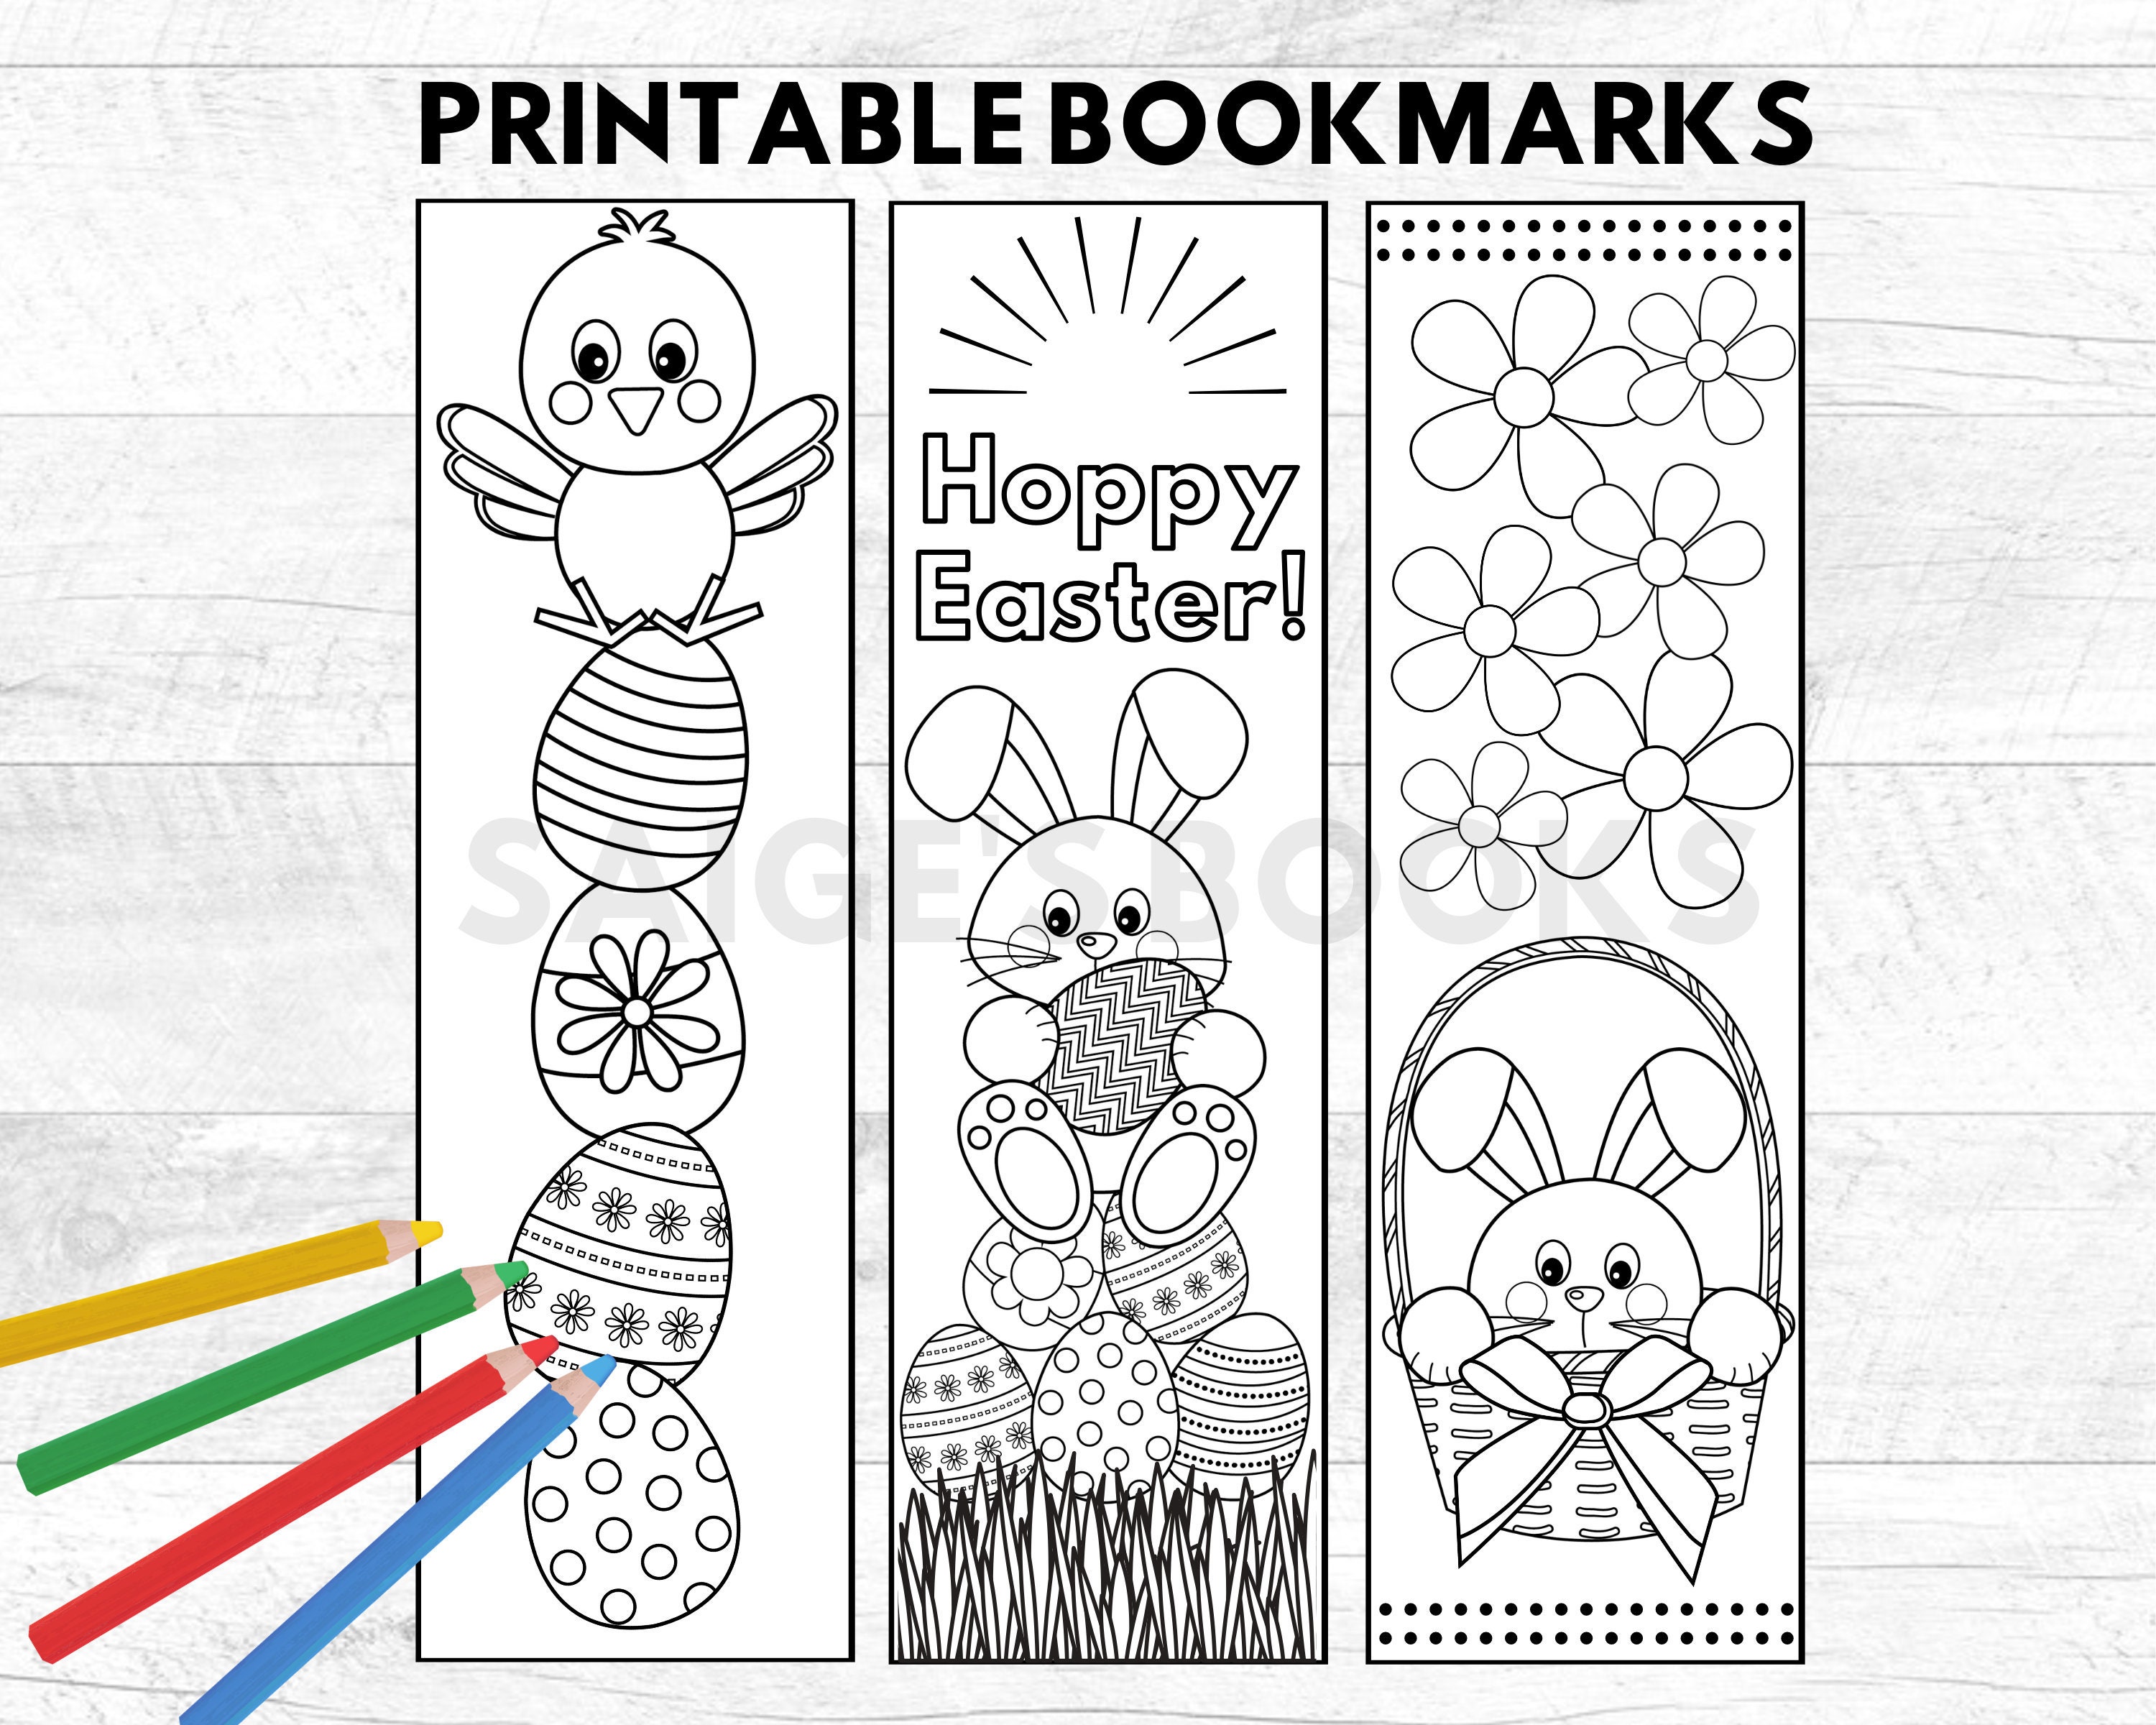 Printable Bookmarks For Kids Activity Shelter Printable Bookmarks To 